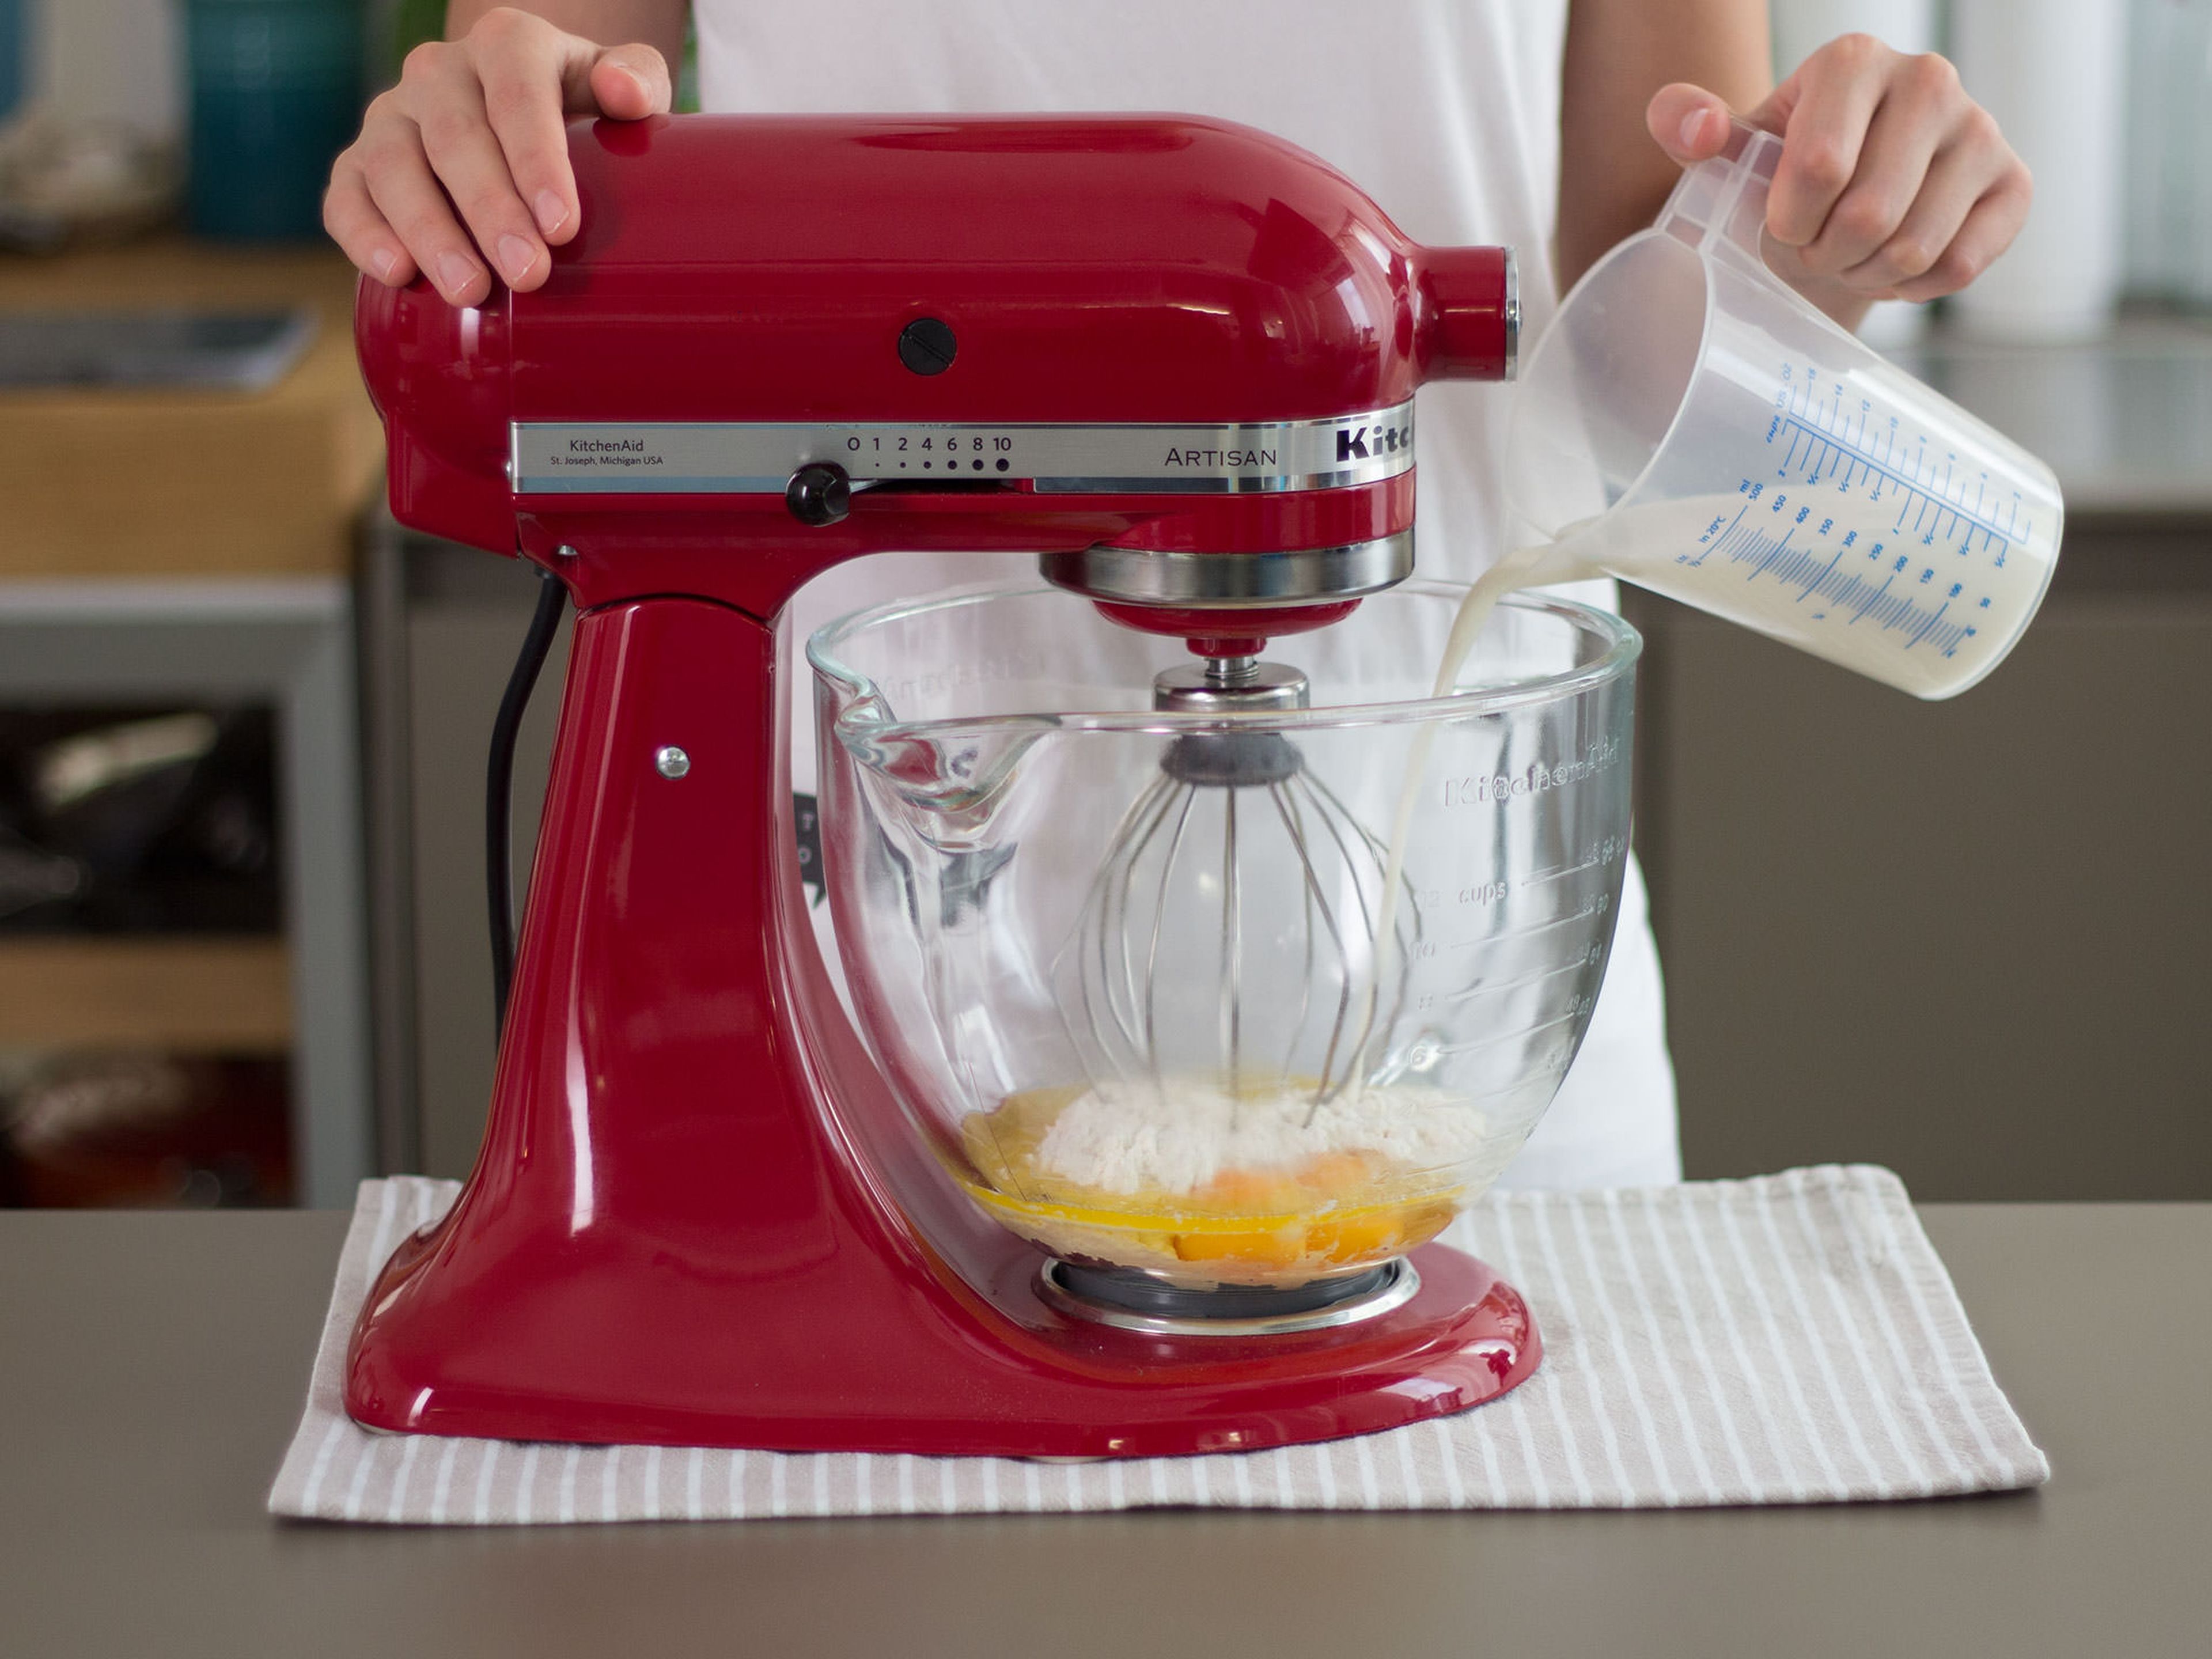 In a stand mixer, beat together the flour, eggs, butter, salt, and milk for approx. 3 – 5 min. until a smooth, even batter forms. Cover  bowl and transfer to fridge for approx. 1 hr.